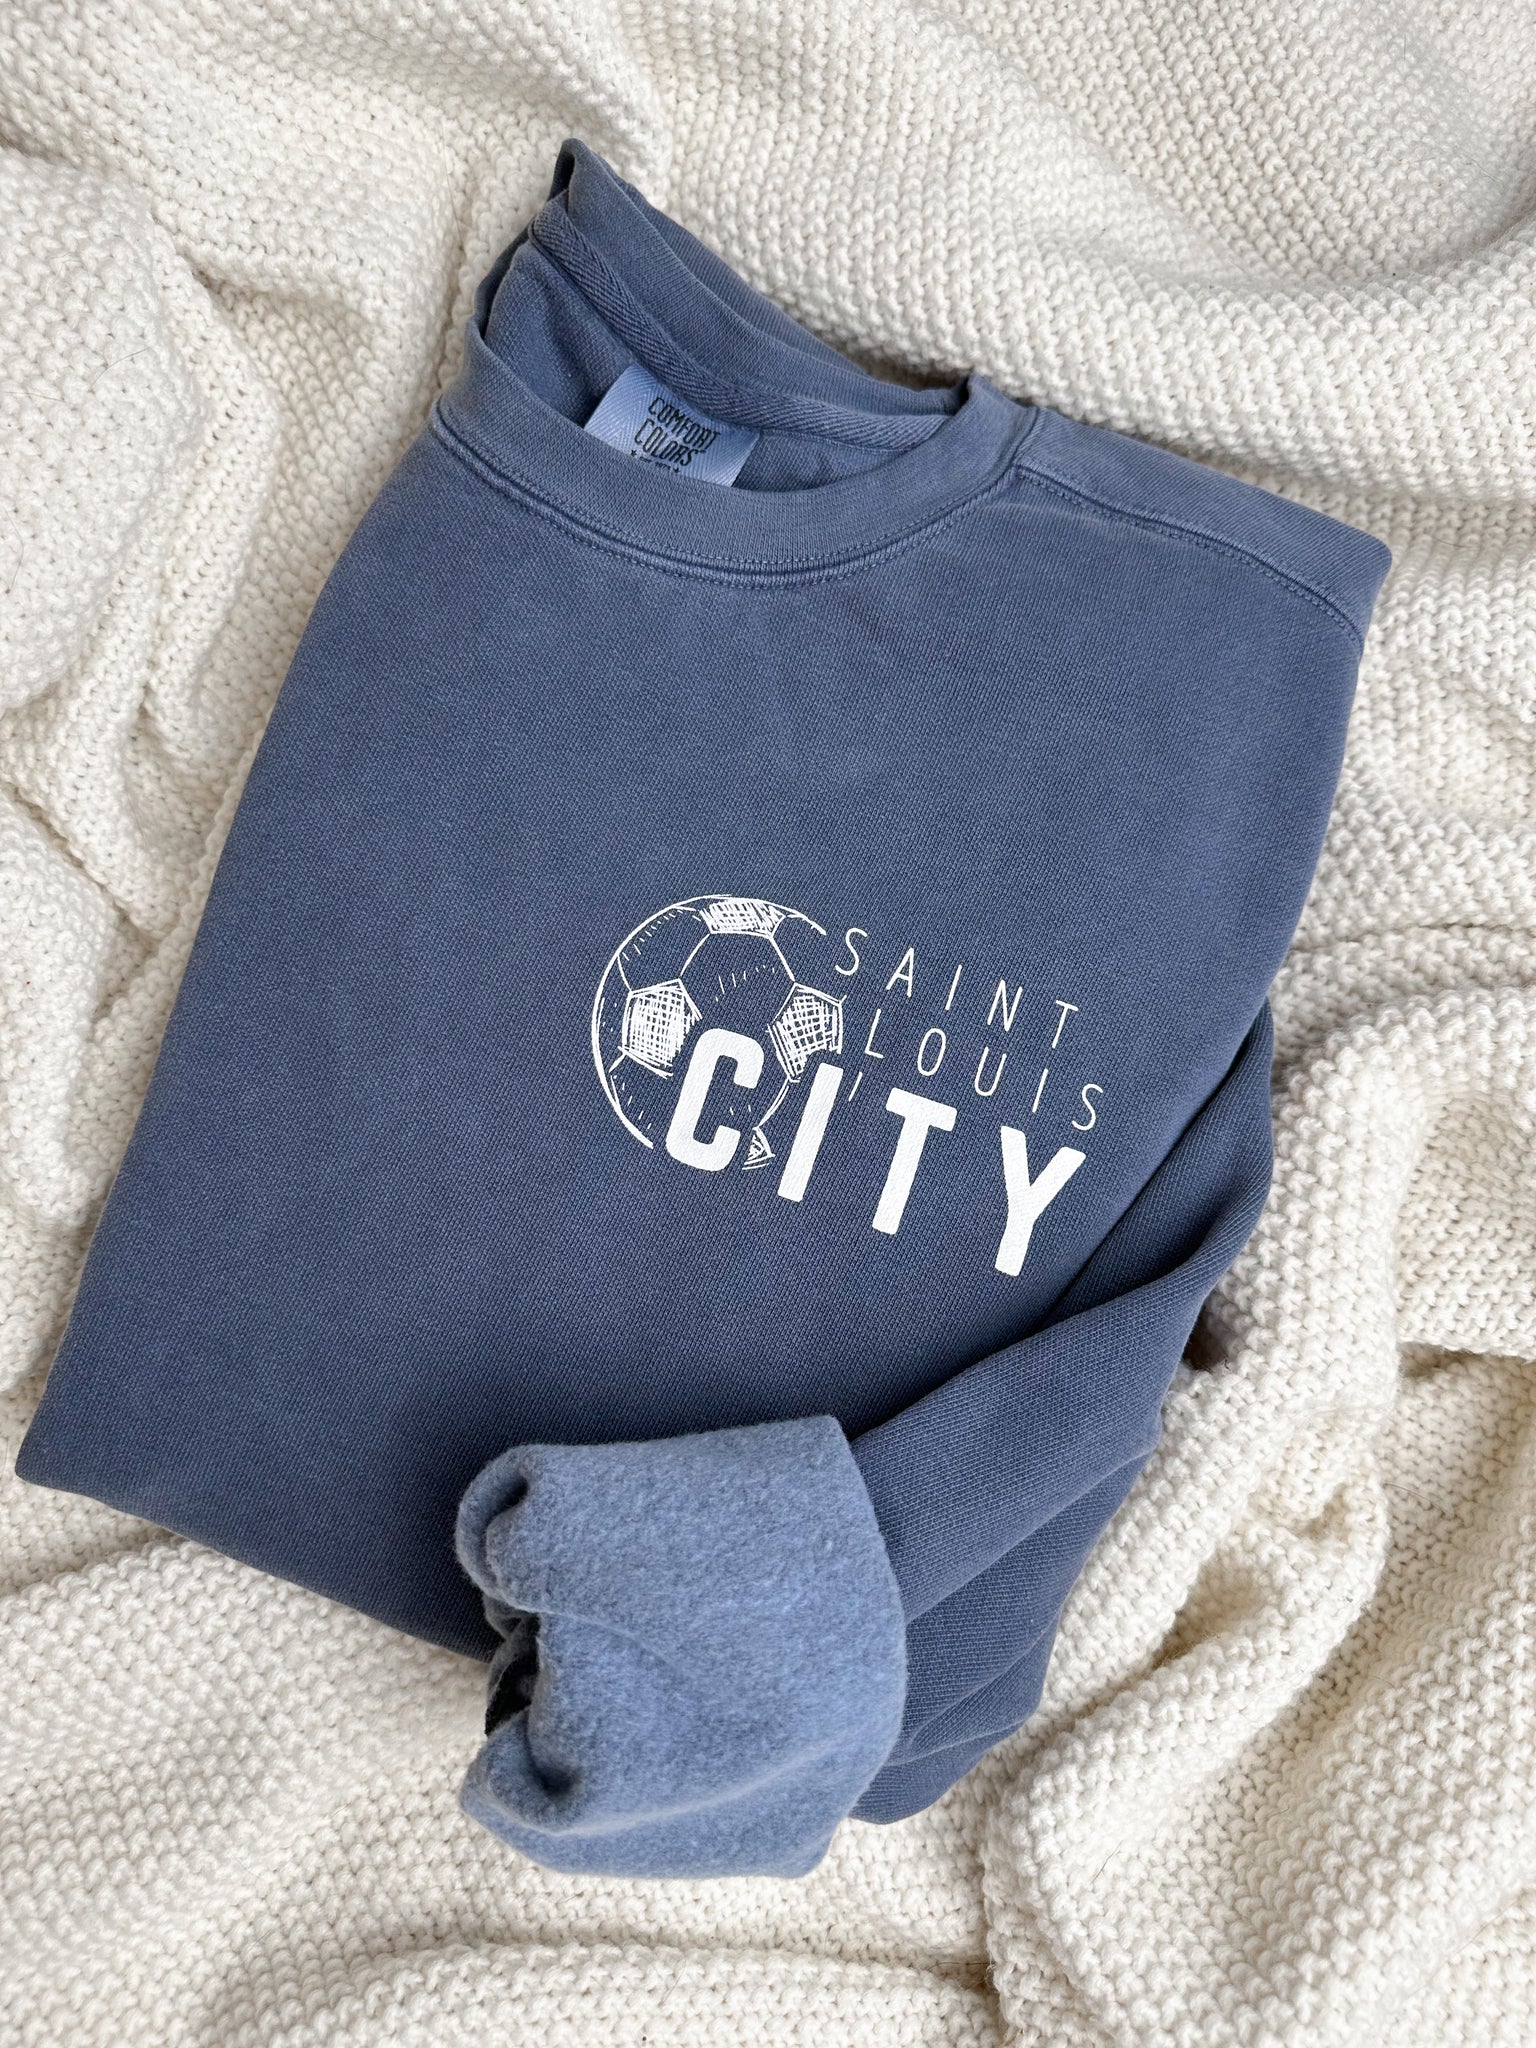 Our City Screen Printed T-shirt and Sweatshirt